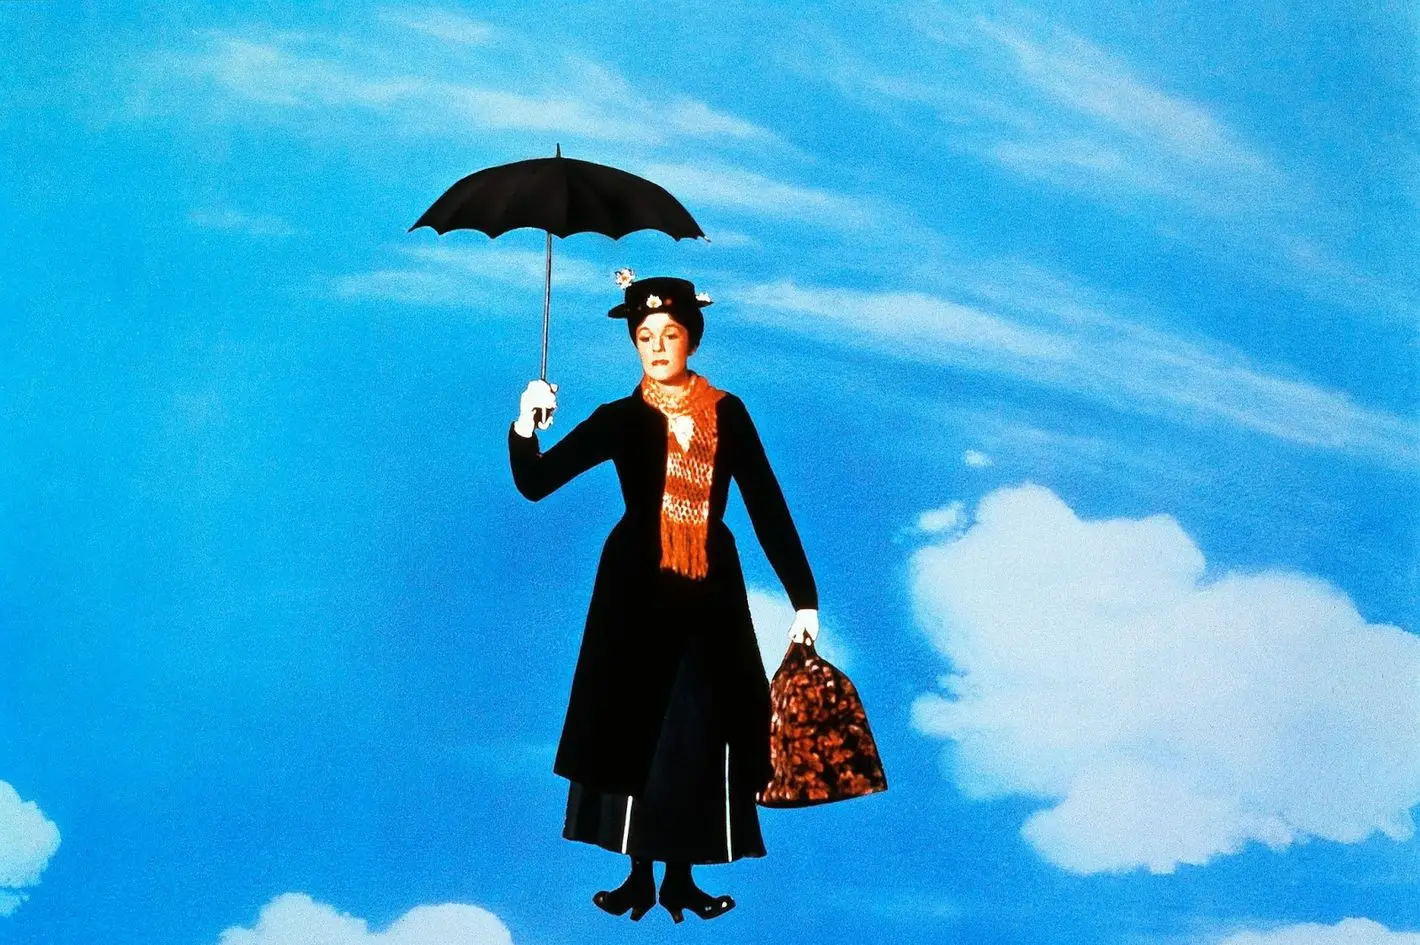 Mary Poppins fun facts